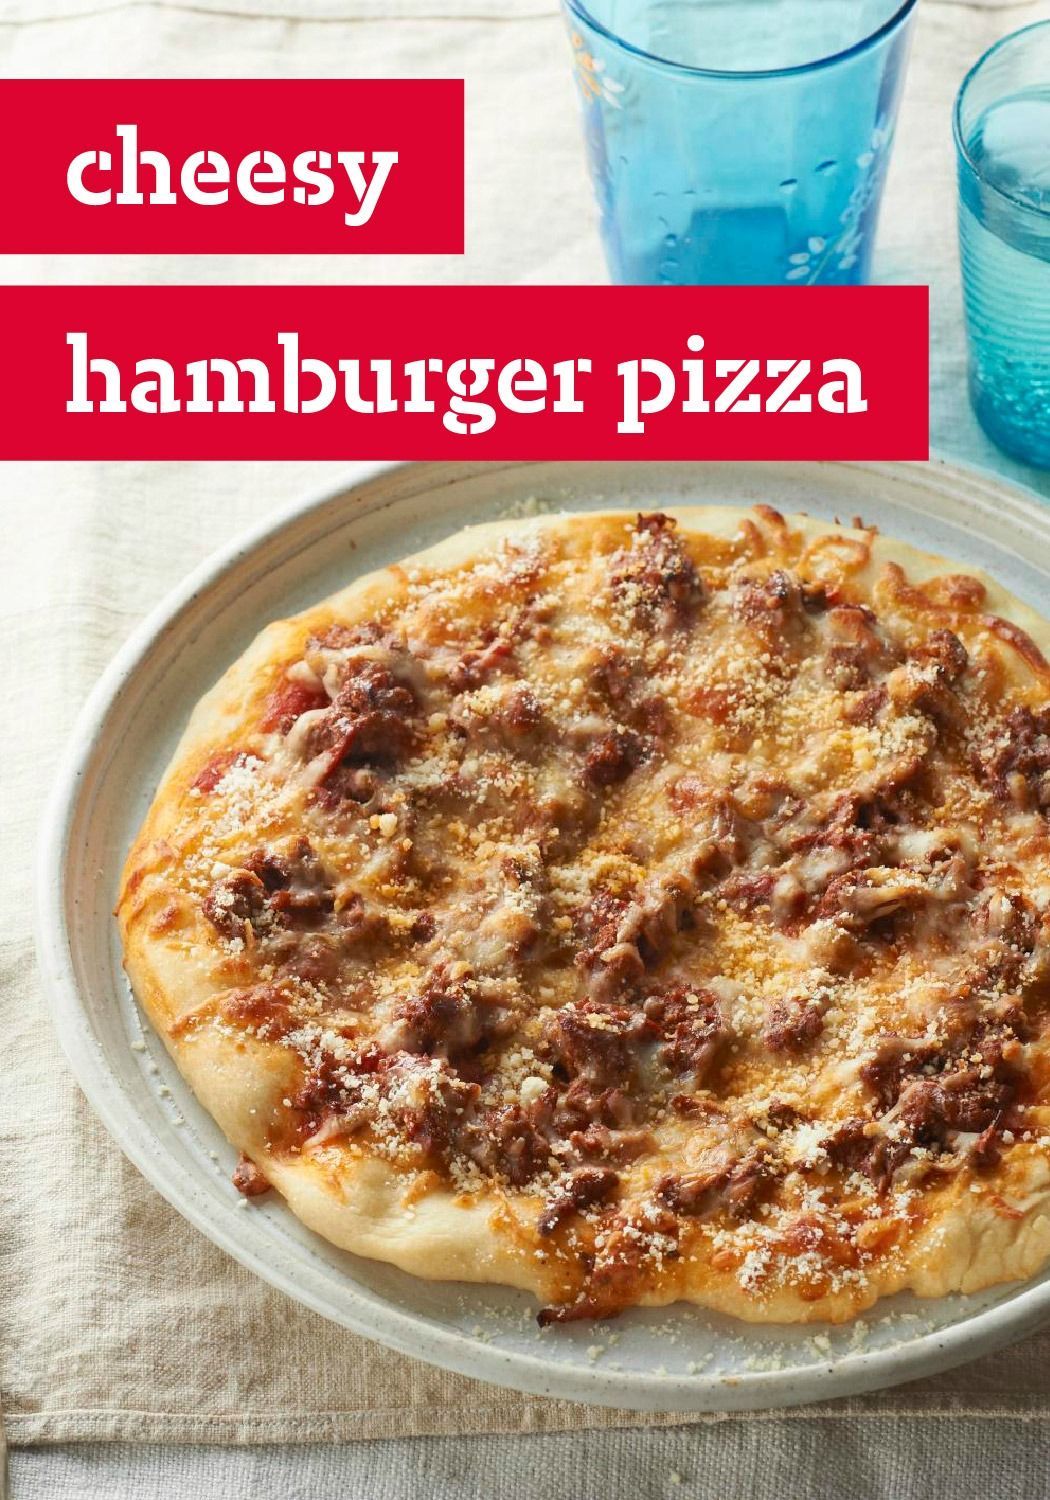 Cheesy Hamburger Pizza — Love cheeseburgers? Love pizza? Chances are excellent you'll love this Cheesy Hamburger Pizza, too! -   23 hamburger pizza recipes
 ideas